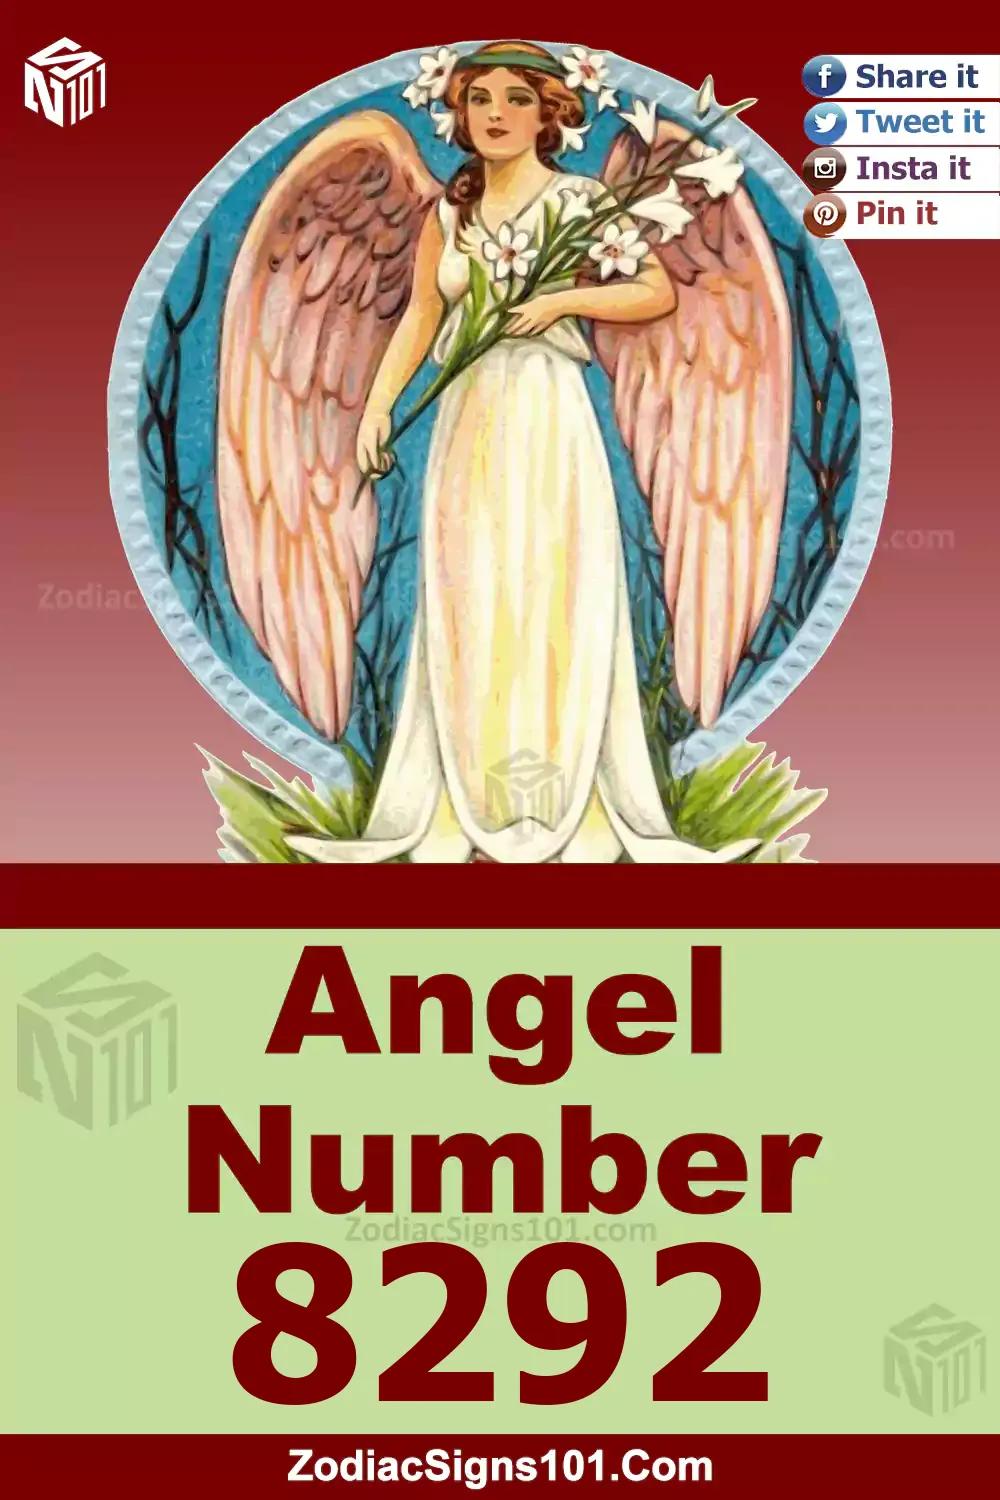 8292 Angel Number Meaning